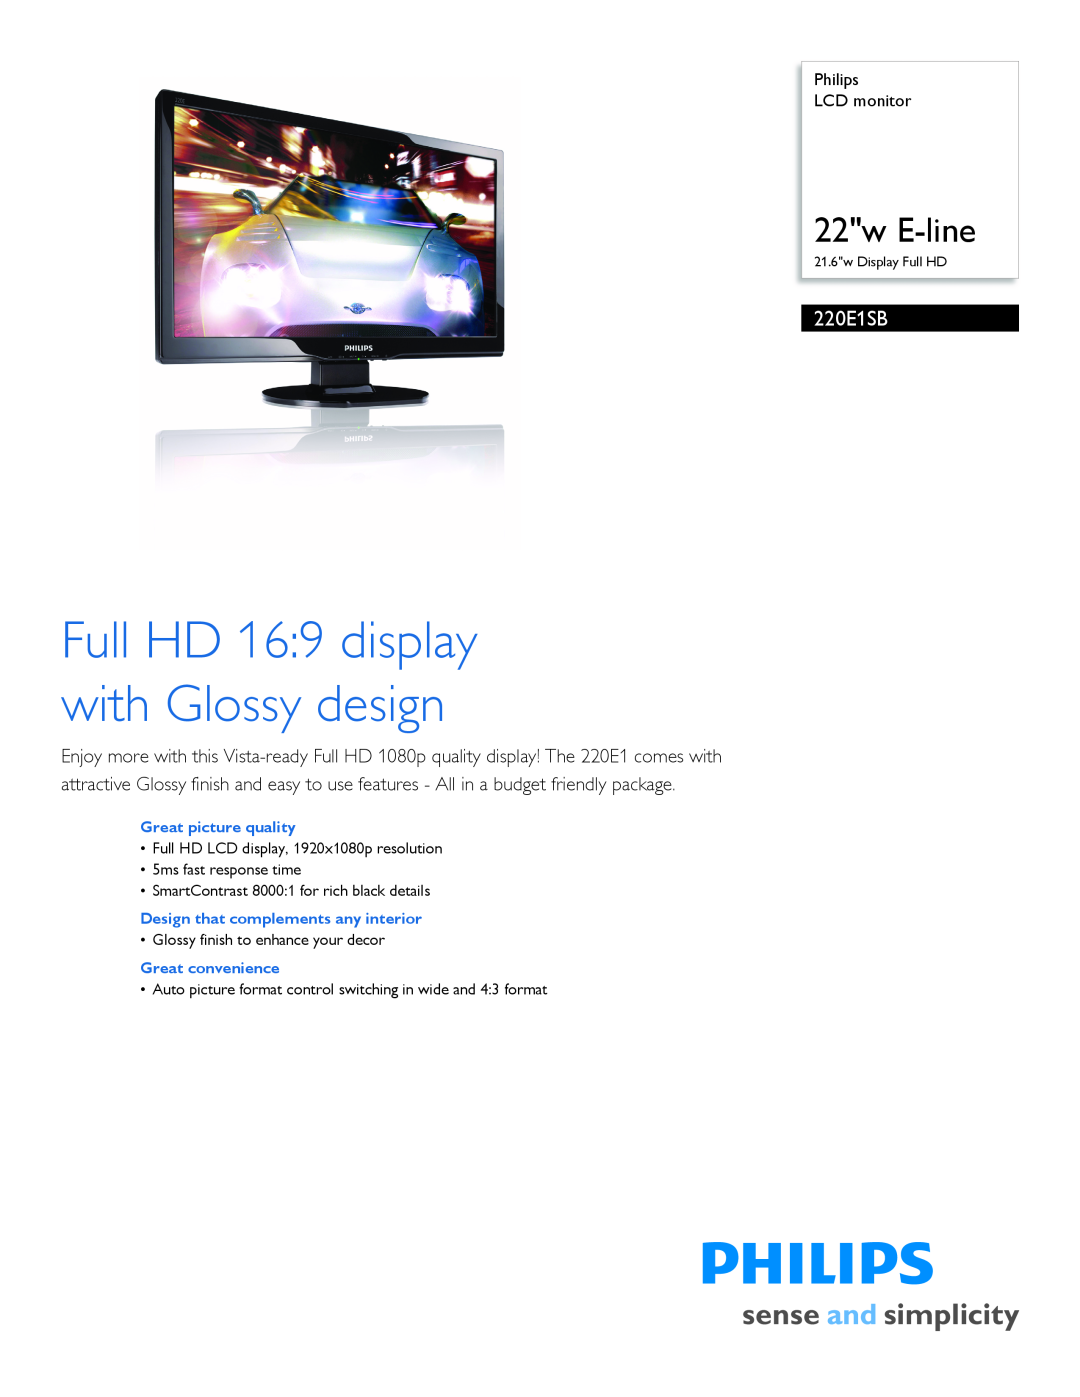 Philips 220E1SB/00 manual Philips LCD monitor, Full HD 16 9 display with Glossy design, 22w E-line 